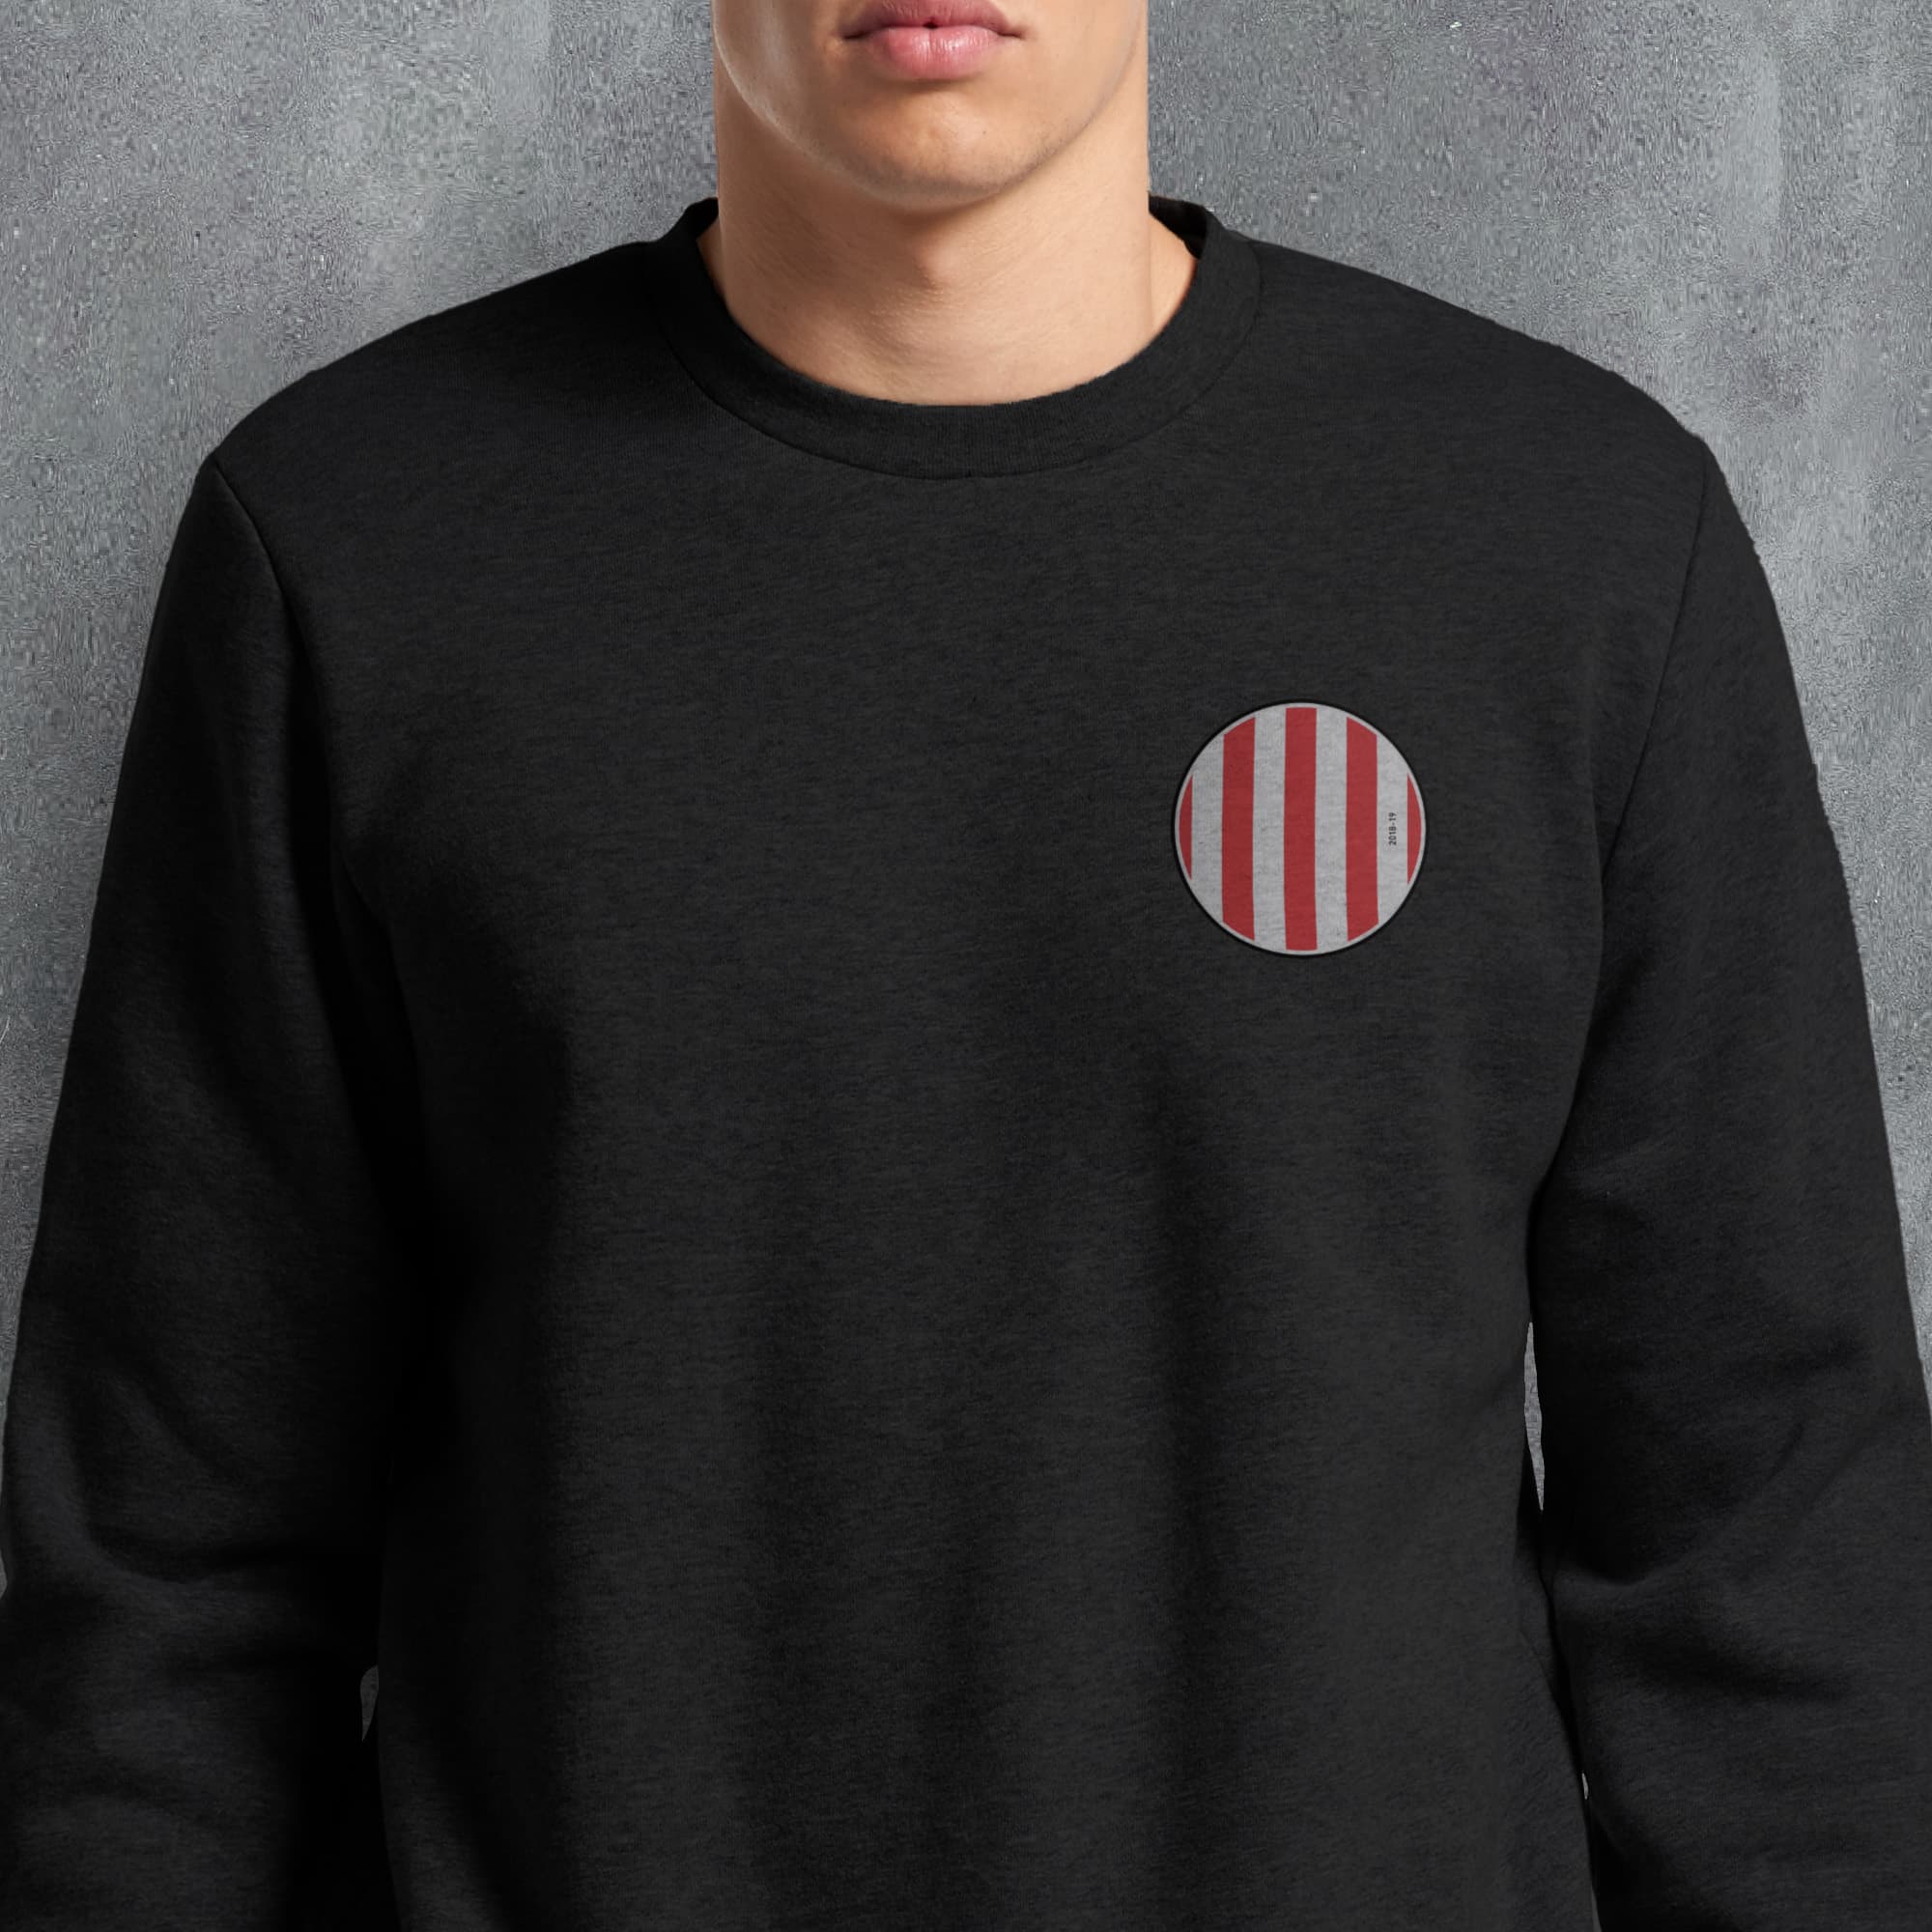 a man wearing a black sweatshirt with a red and white striped pocket